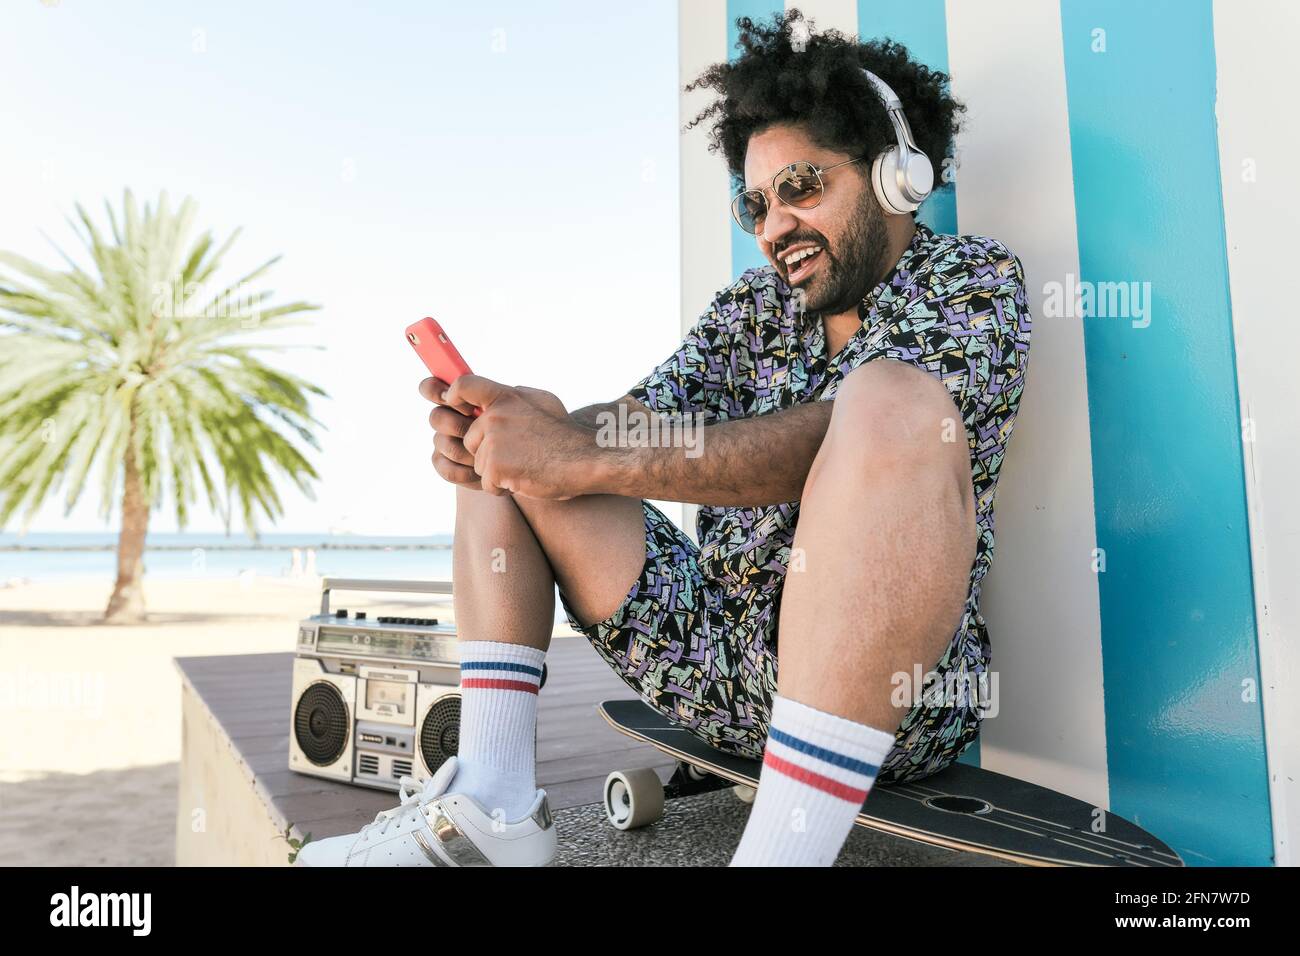 Afro Latin man having fun with mobile smartphone and listening music with headphones and vintage boombox stereo on tropical beach during vacation time Stock Photo